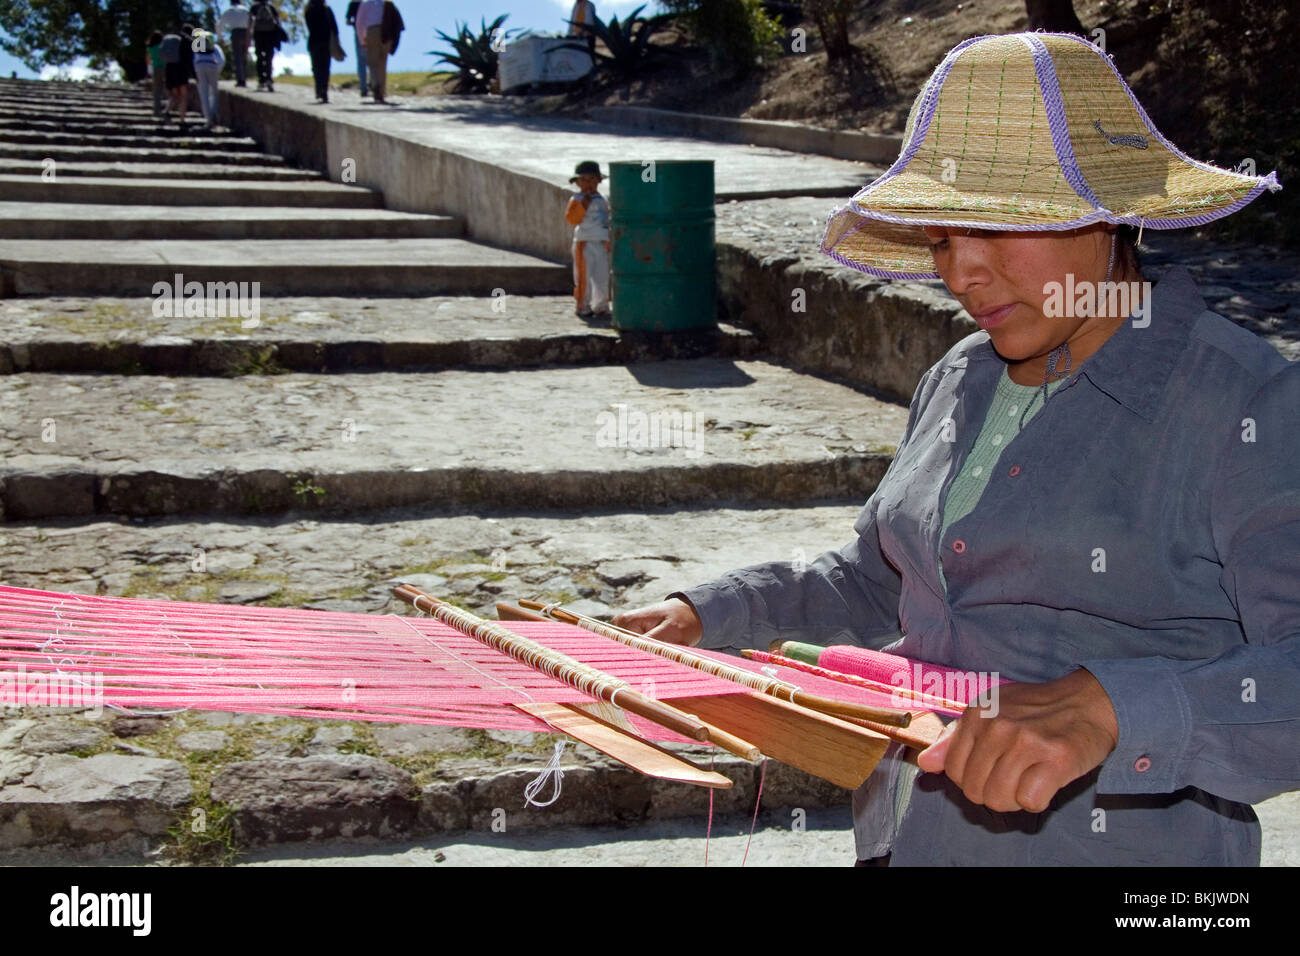 Mexican woman weaving with a loom in the town of Cholula, Puebla, Mexico. Stock Photo